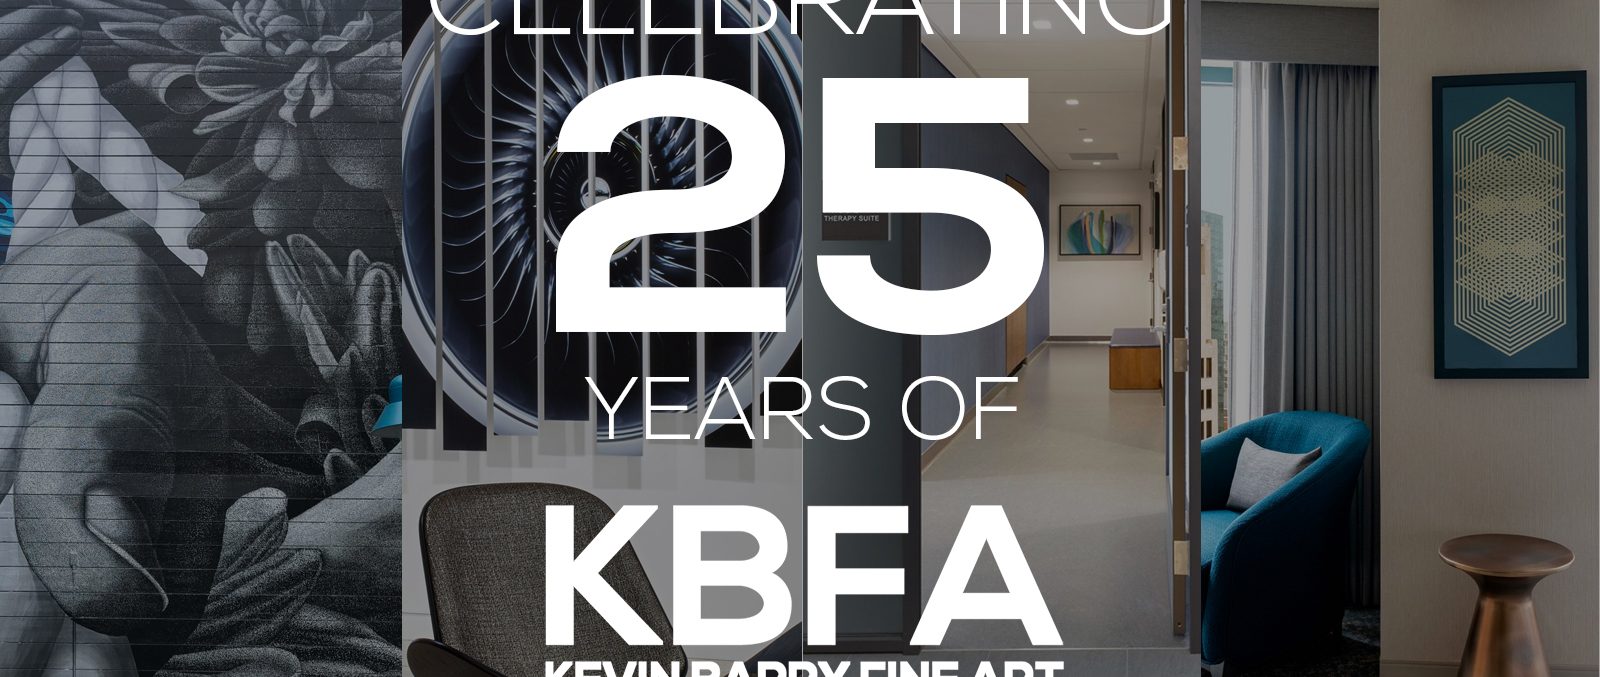 After 25 Years — What’s Next for KBAA